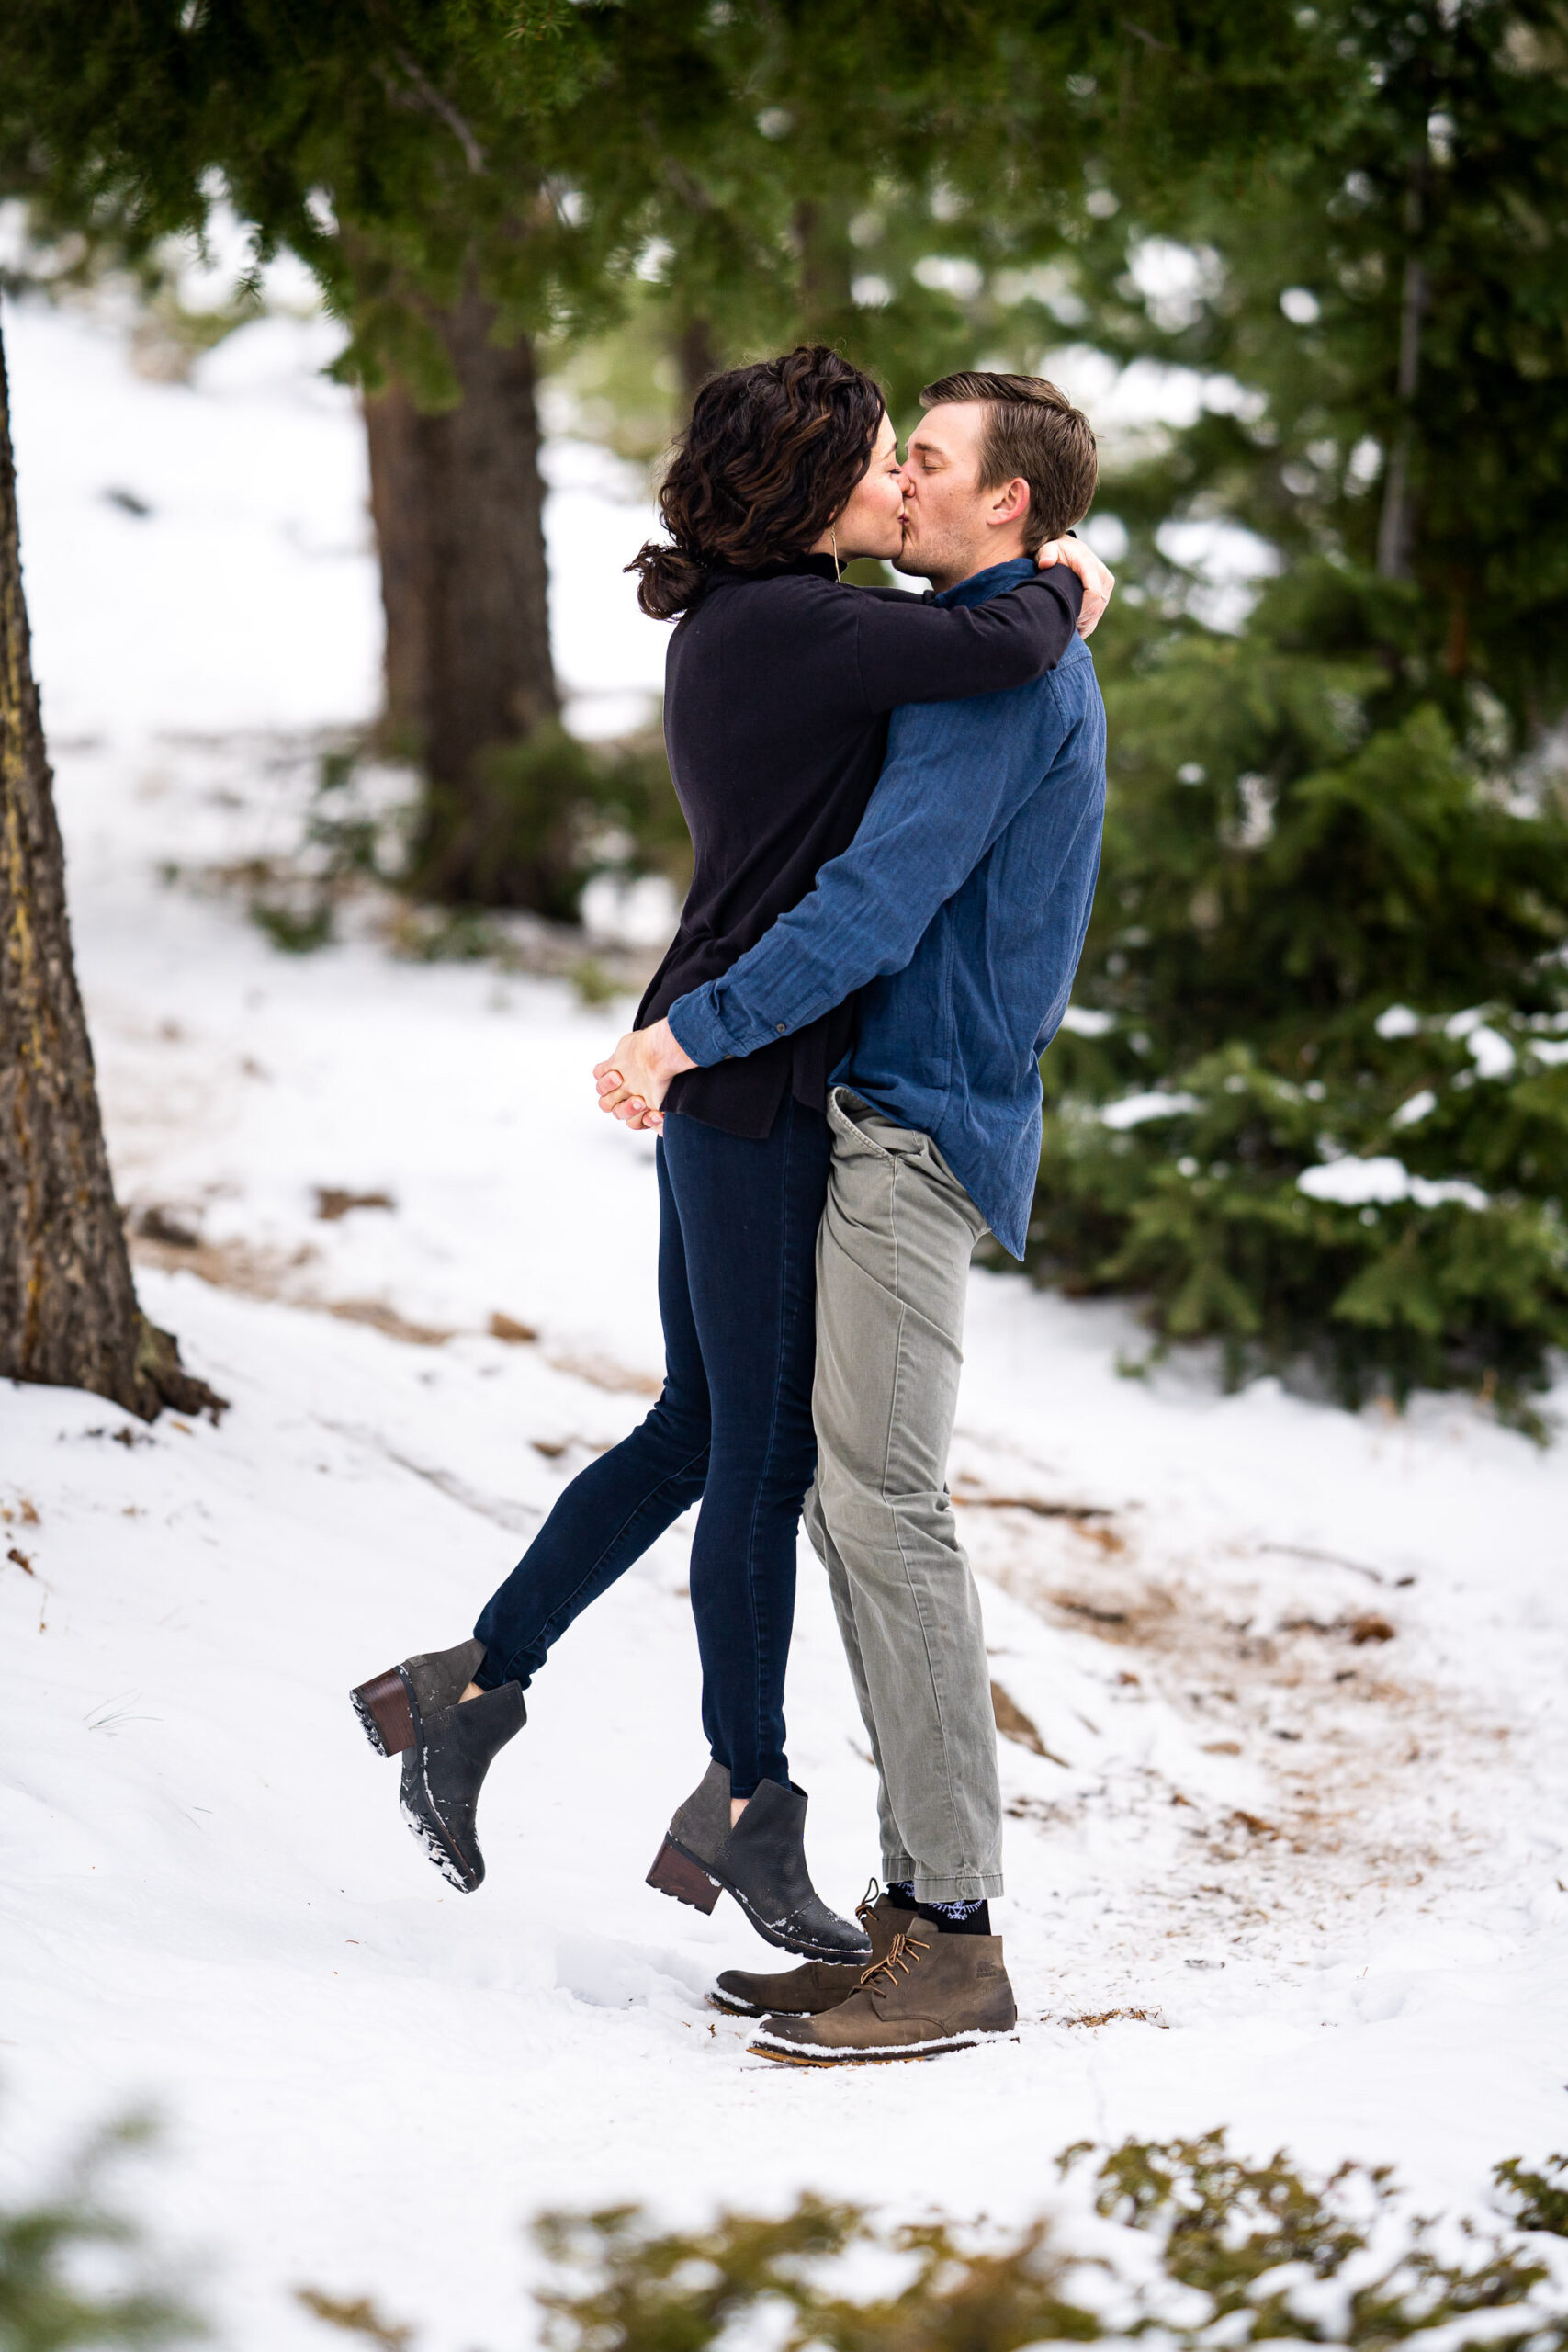 Engaged couple kisses in the snow in a dense evergreen mountain forest, Engagement Session, Engagement Photos, Engagement Photos Inspiration, Engagement Photography, Engagement Photographer, Winter Engagement Photos, Mountain Engagement Photos, Lost Gulch Overlook engagement session, Lost Gulch Overlook engagement photos, Lost Gulch Overlook engagement photography, Lost Gulch Overlook engagement photographer, Lost Gulch Overlook  engagement inspiration, Boulder engagement session, Boulder engagement photos, Boulder engagement photography, Boulder engagement photographer, Boulder engagement inspiration, Colorado engagement session, Colorado engagement photos, Colorado engagement photography, Colorado engagement photographer, Colorado engagement inspiration